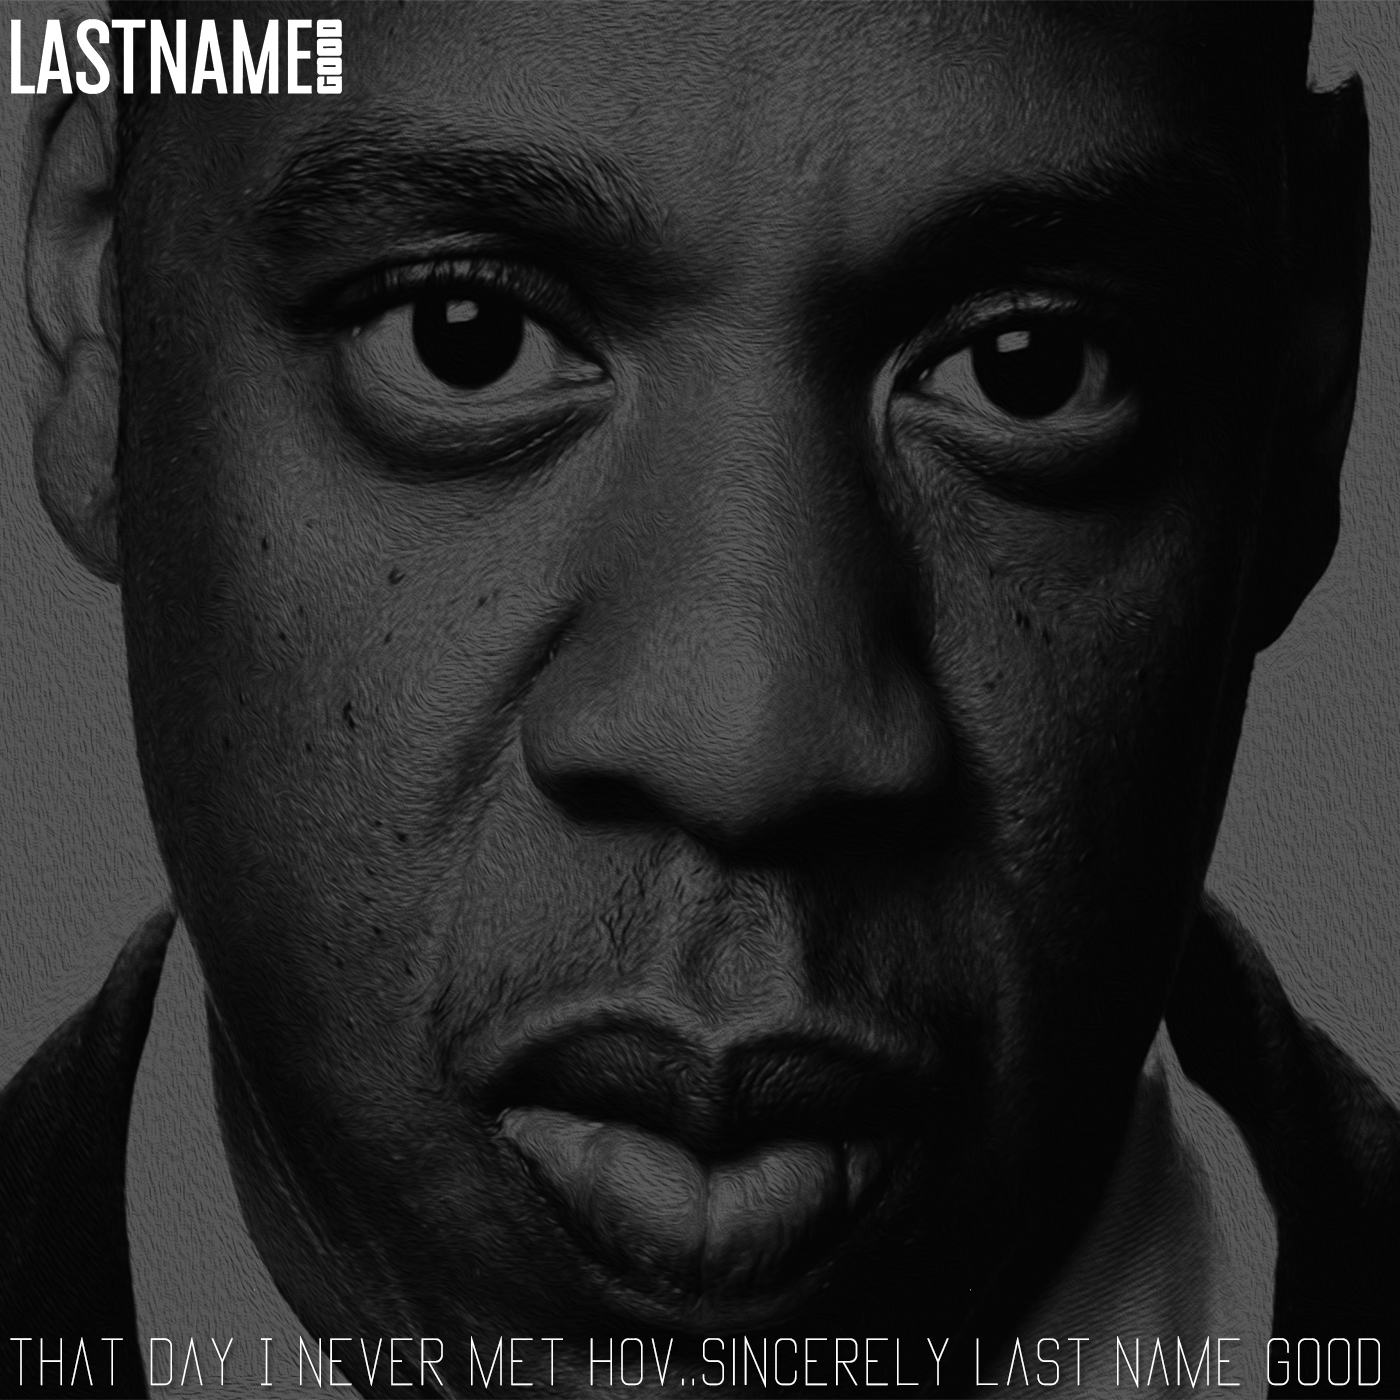 Producer Pays Homage To JAY Z, Drops ‘That Day I Never Met Hov..Sincerely Last Name Good’